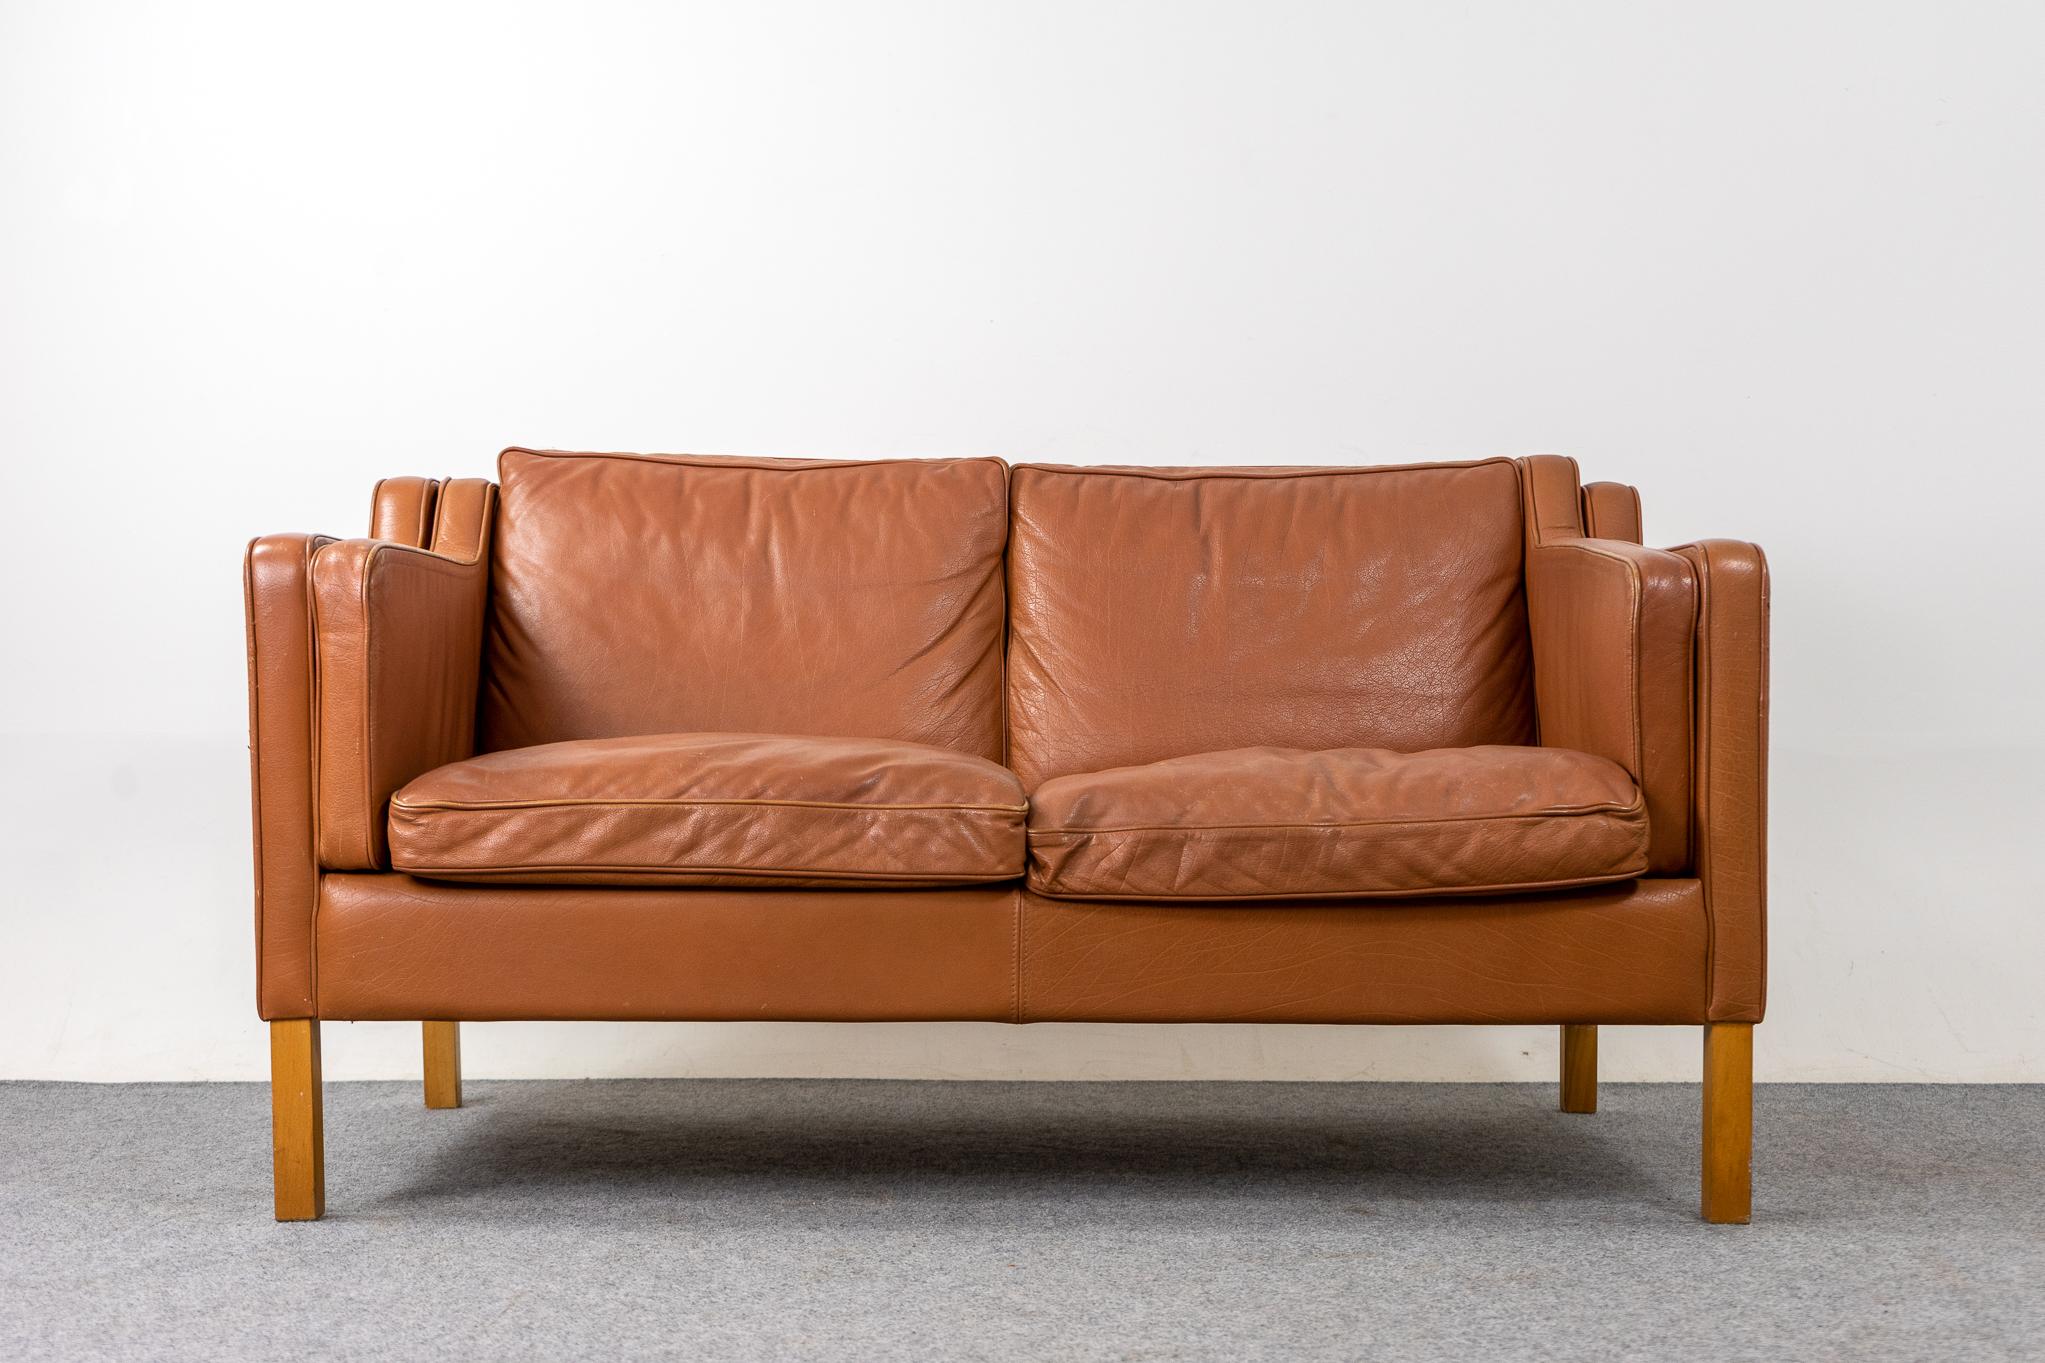 Leather loveseat by Stouby, circa 1960's. Tan soft and supple leather that is durable to ensure years of use and enjoyment. Compact footprint make this the perfect seating solution for urban dwellers in cozy lofts or condos. Great patina! 

Please